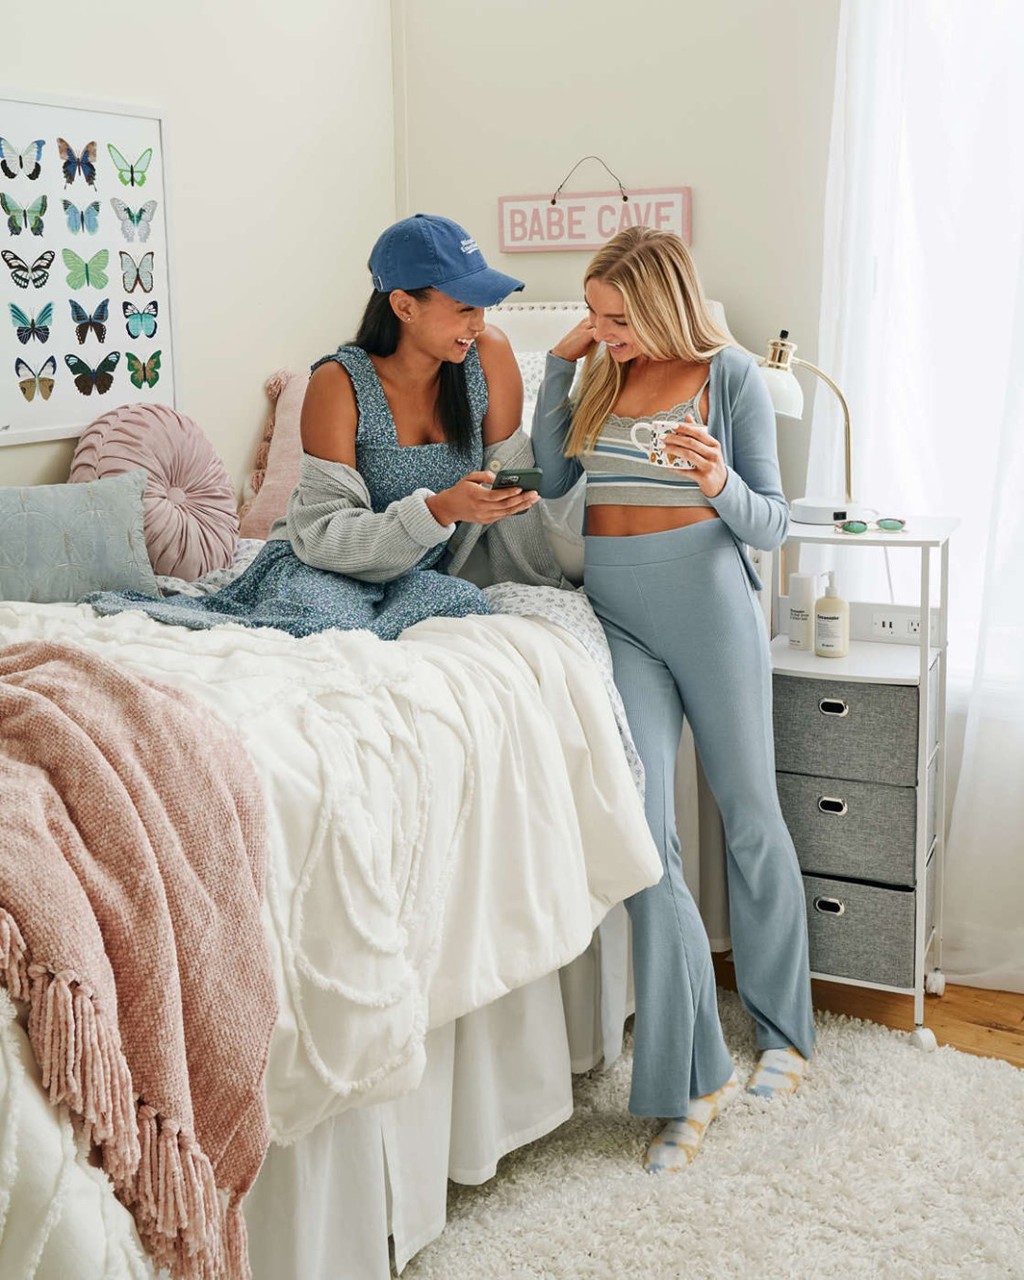 Shared Dorm Items 15 Items To Share With Your Roommates In College College Fashion 